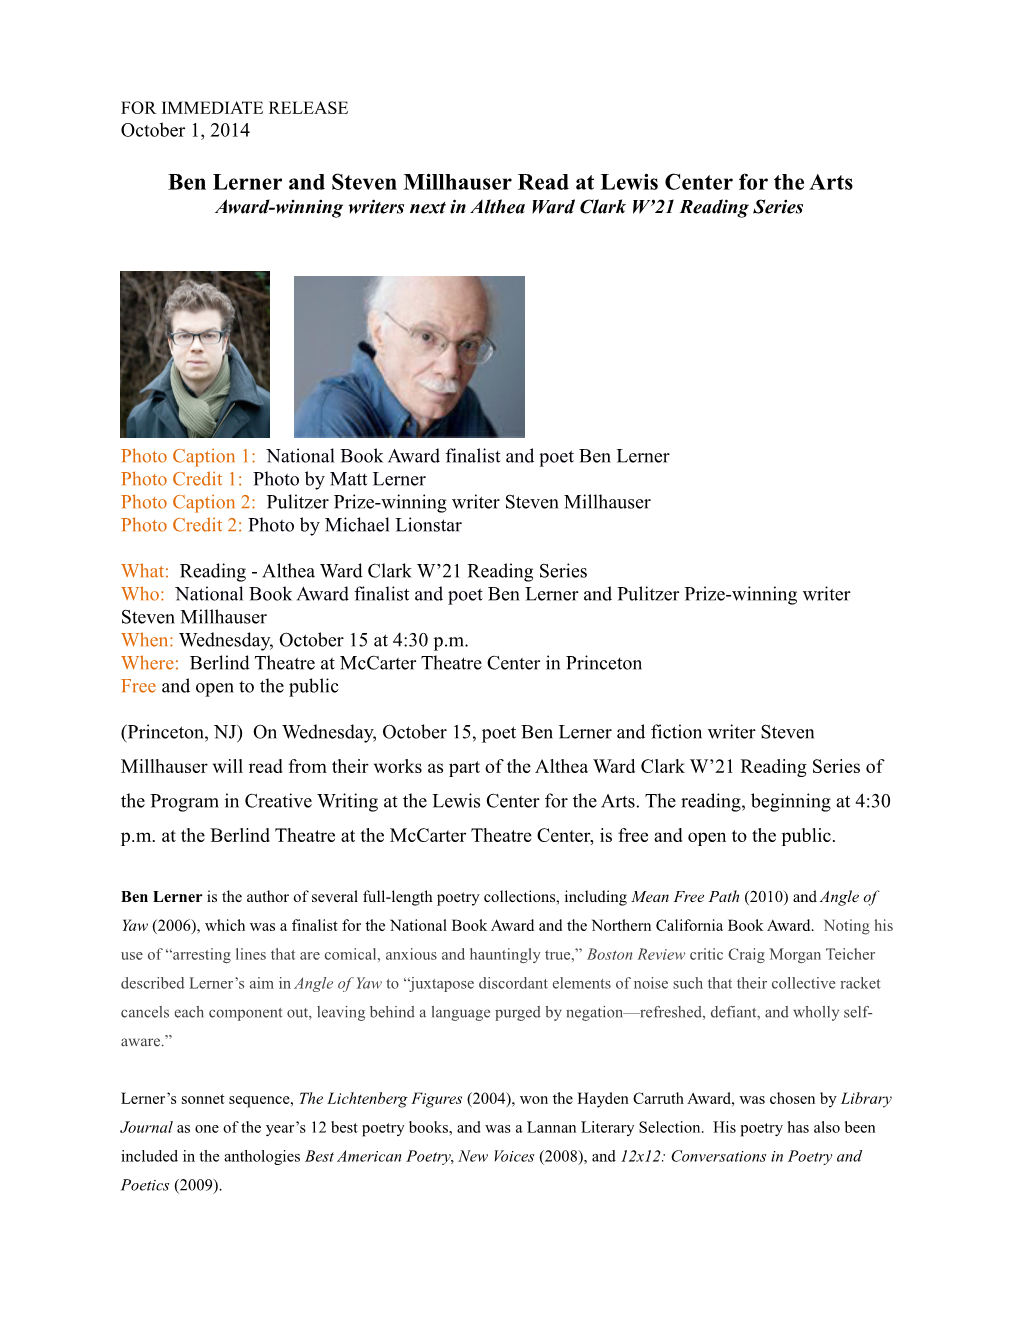 Ben Lerner and Steven Millhauserread at Lewis Center for the Arts